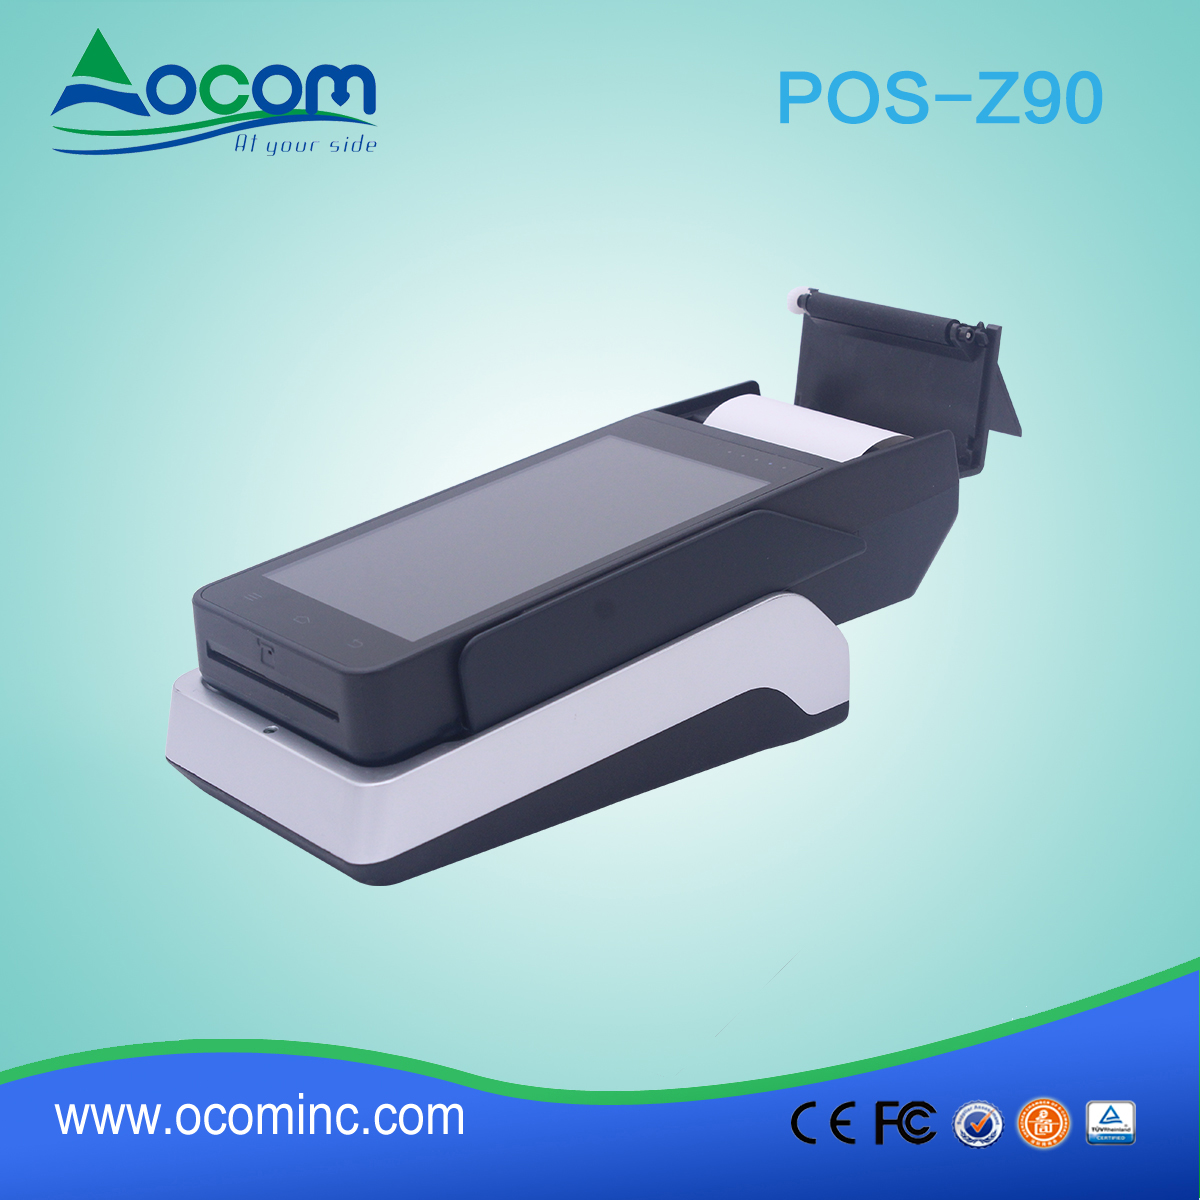 OCOM POS-Z90 all in one handheld android pos terminal with printer and  nfc reader